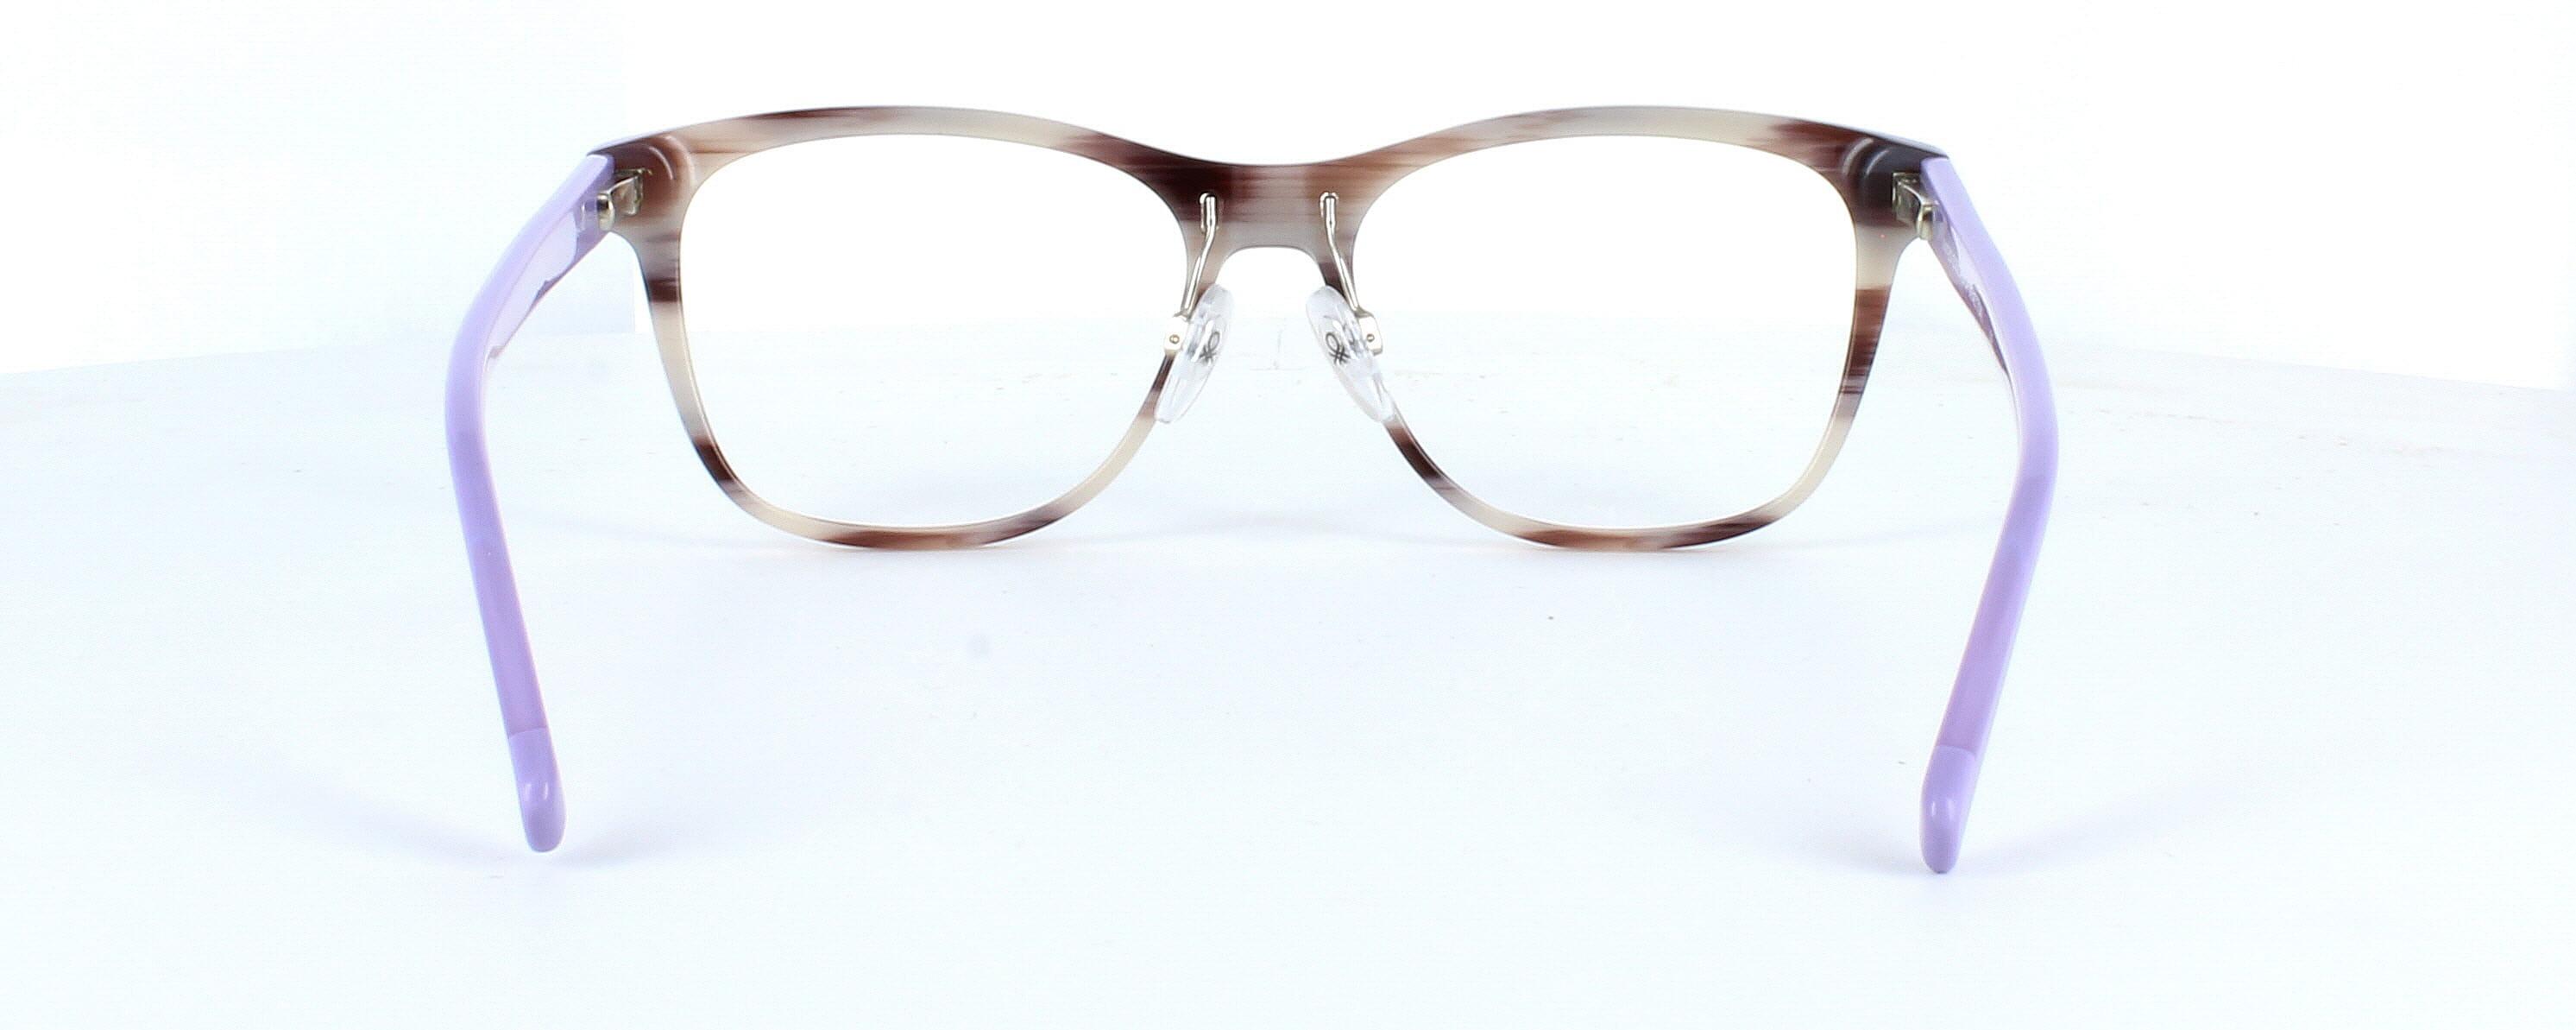 Benetton BEO1003 746 - Women's hand made acetate with light coloured tortoise front face and mauve-coloured arms - image view 3